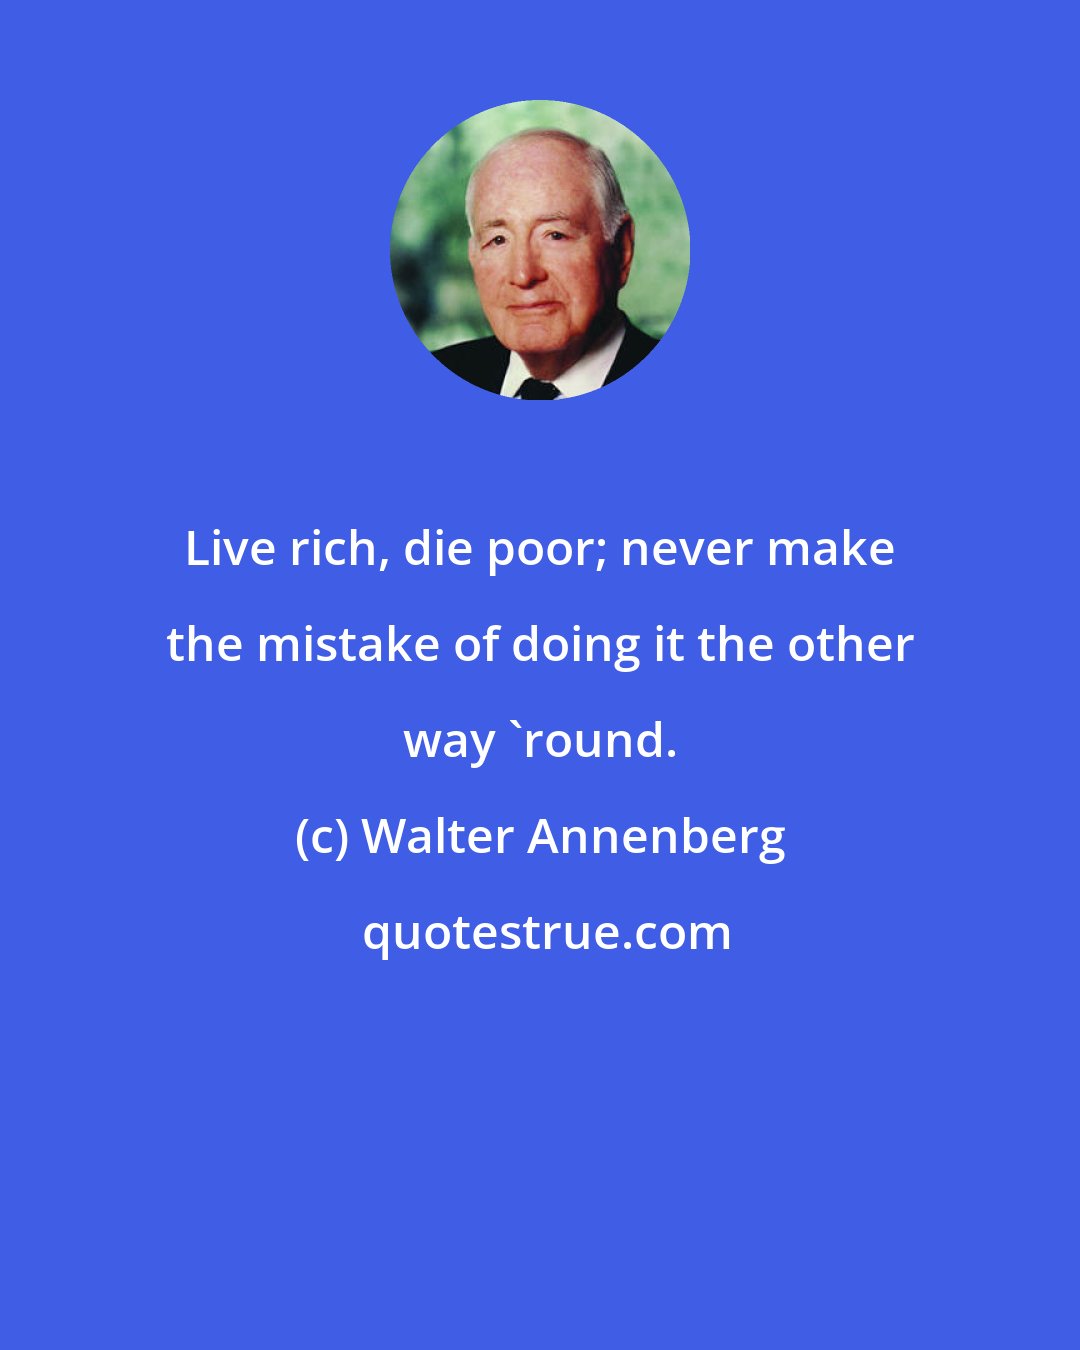 Walter Annenberg: Live rich, die poor; never make the mistake of doing it the other way 'round.